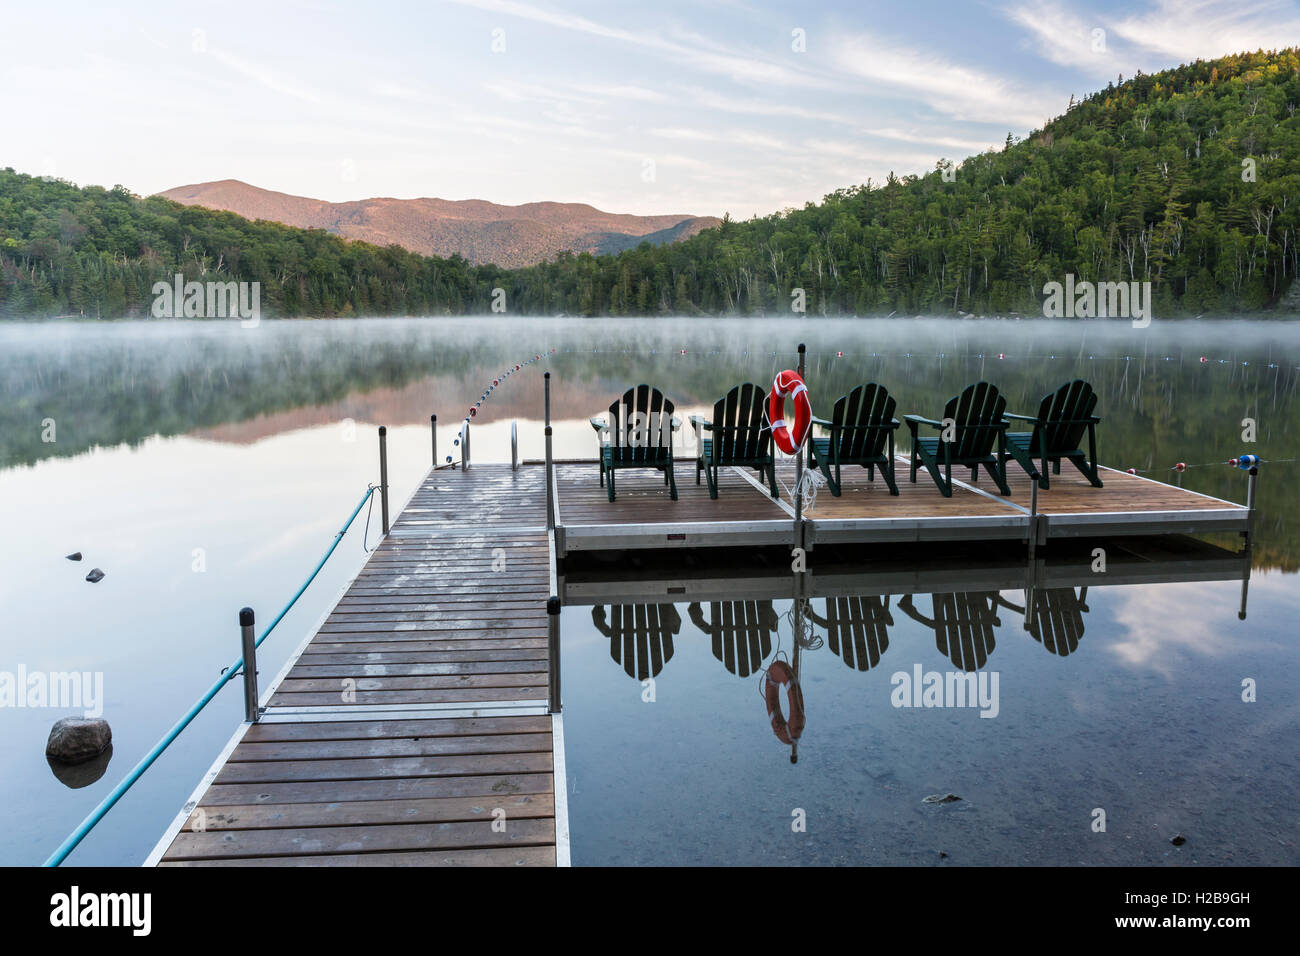 Adirondack Chairs on the Heart Lake dock on a misty morning in the High Peaks region of the Adirondacks near Lake Placid, NY Stock Photo